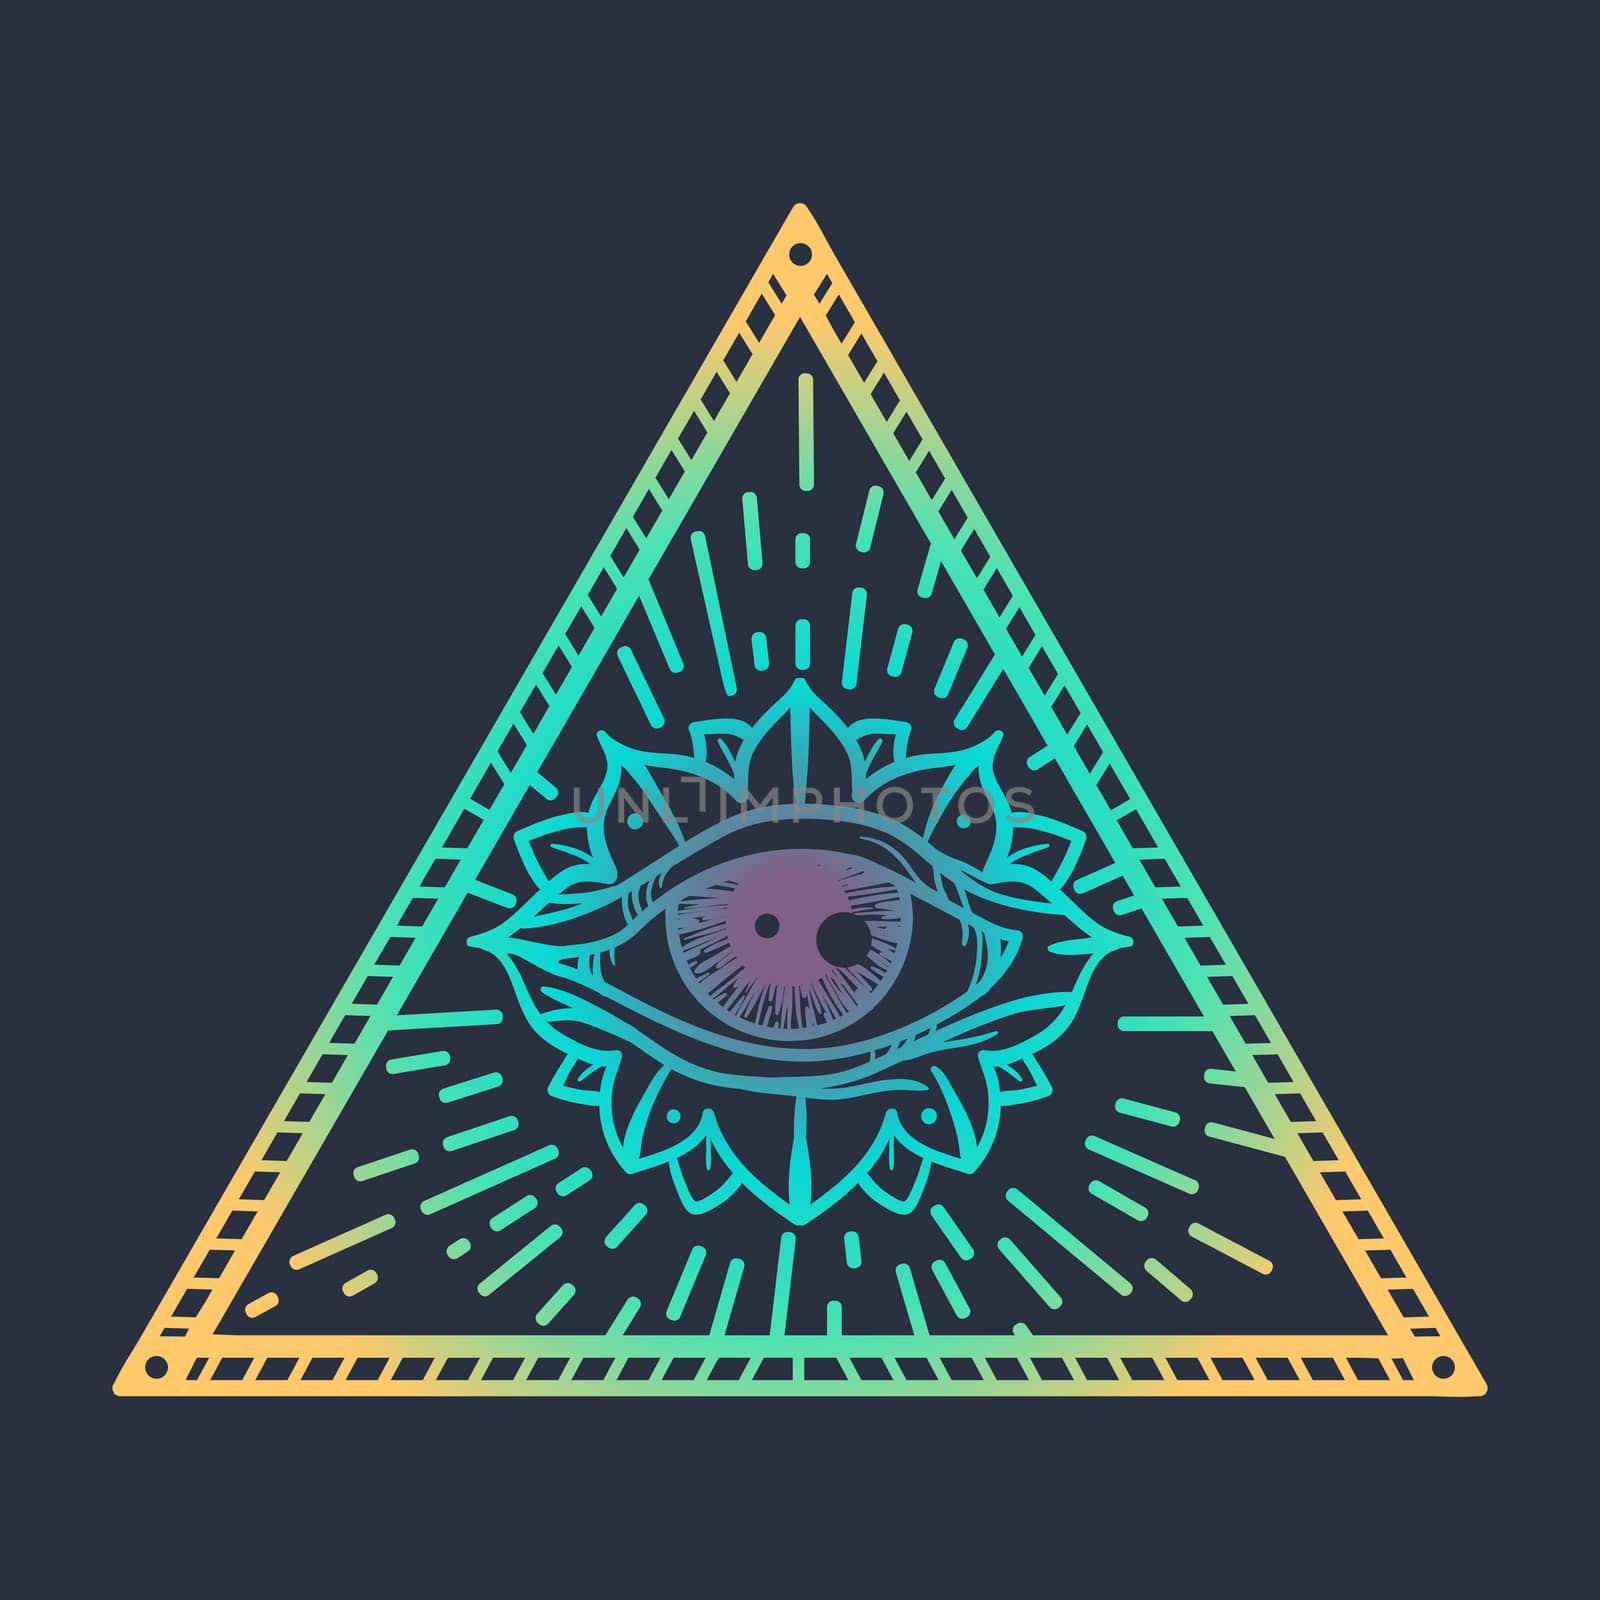 All Seeing Eye in Triangle by barsrsind